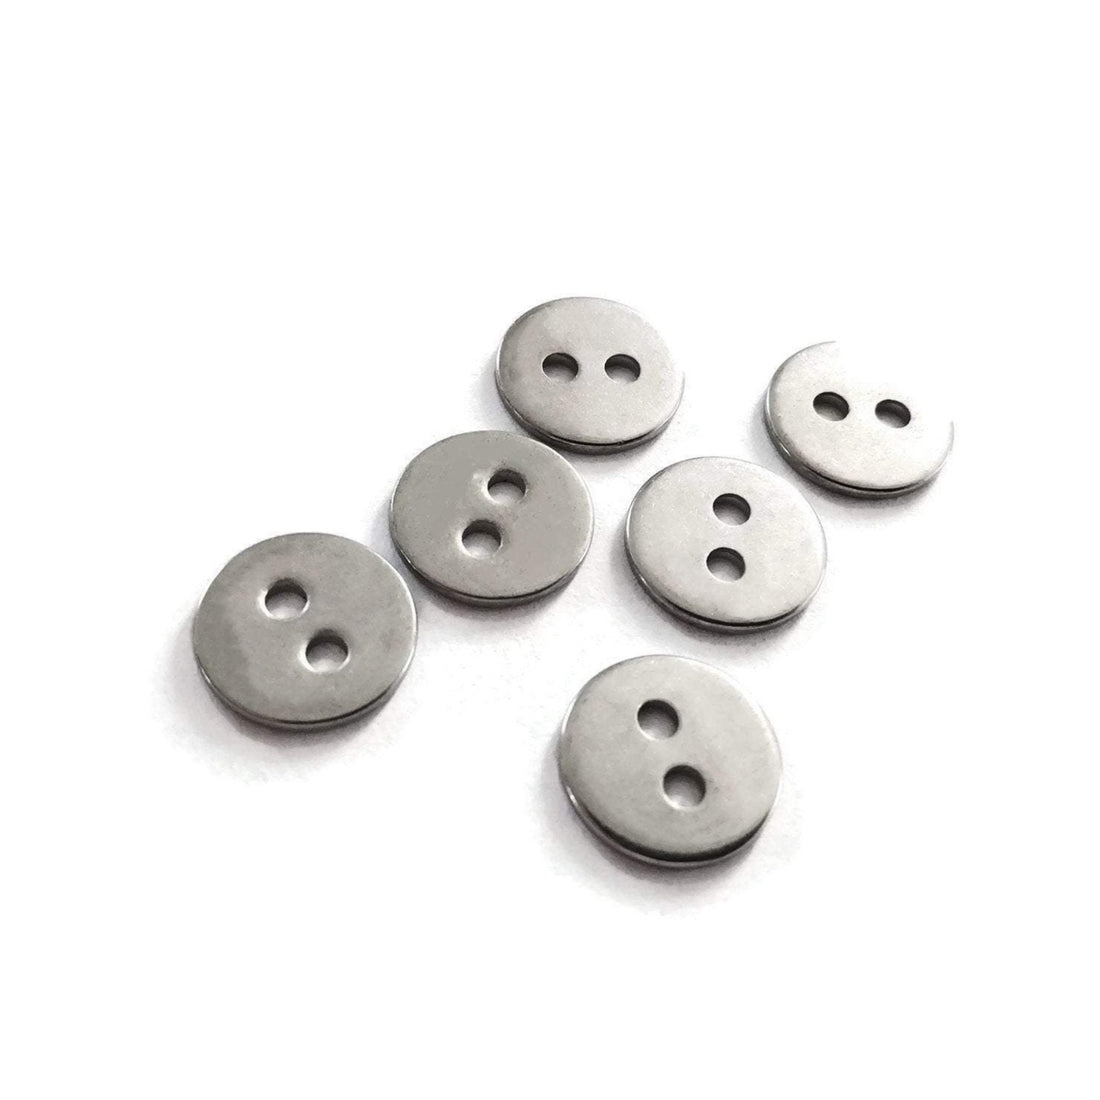 6 silver metal buttons, stainless steel buttons or clasps, round buttons 12mm 